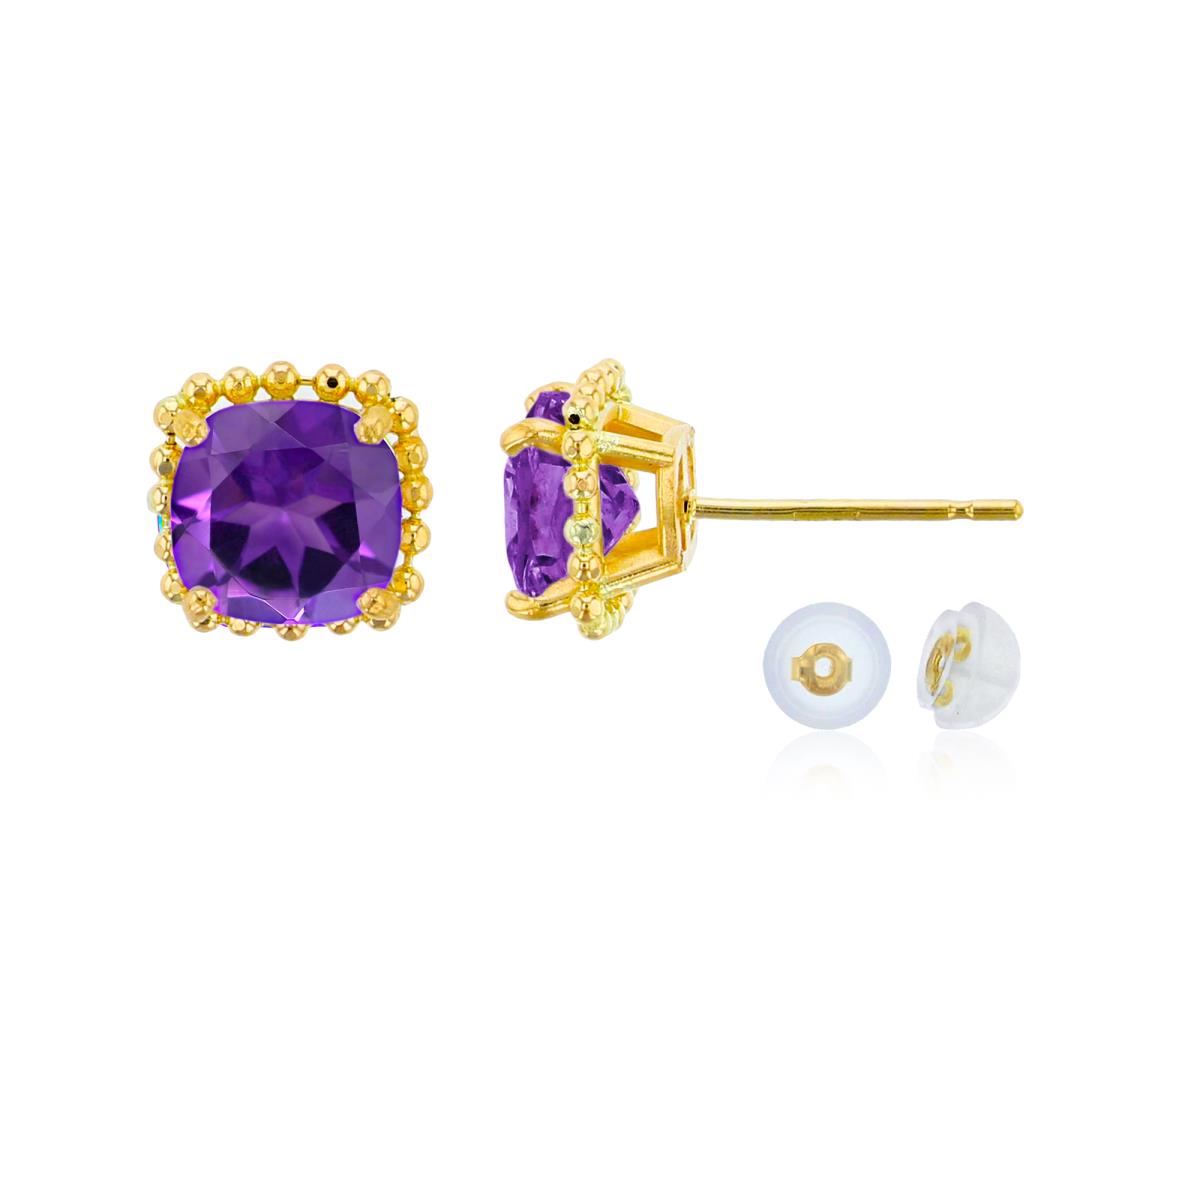 14K Yellow Gold 6x6mm Cushion Cut Amethyst Bead Frame Stud Earring with Silicone Back